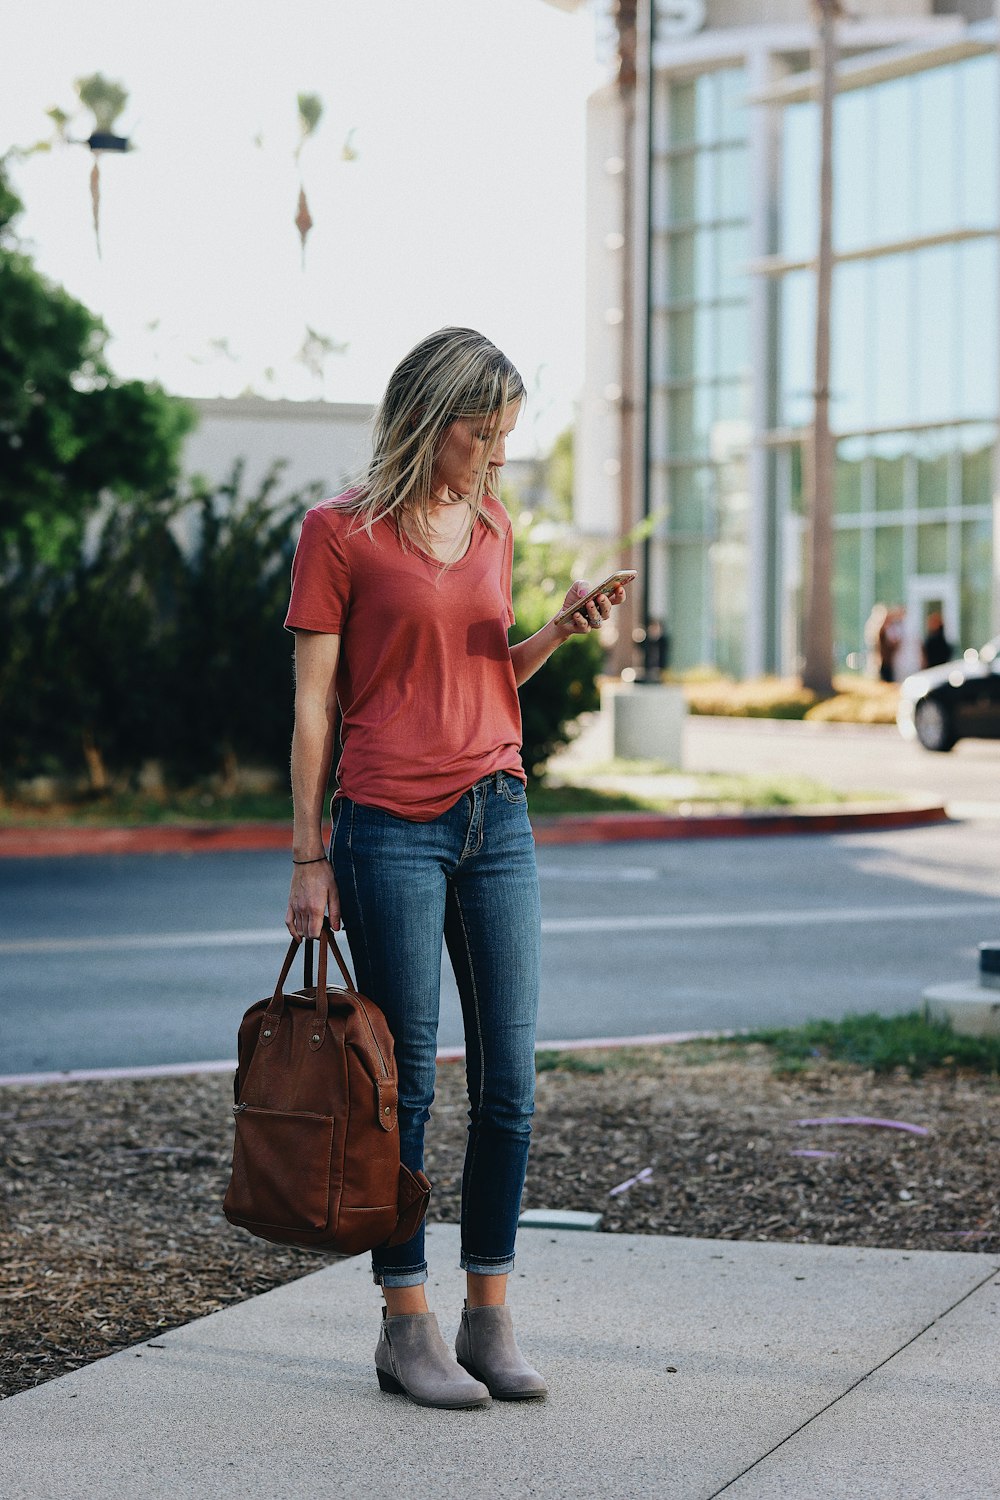 Woman in red t-shirt and blue denim jeans brown leather sling bag photo – Free Human Image on Unsplash